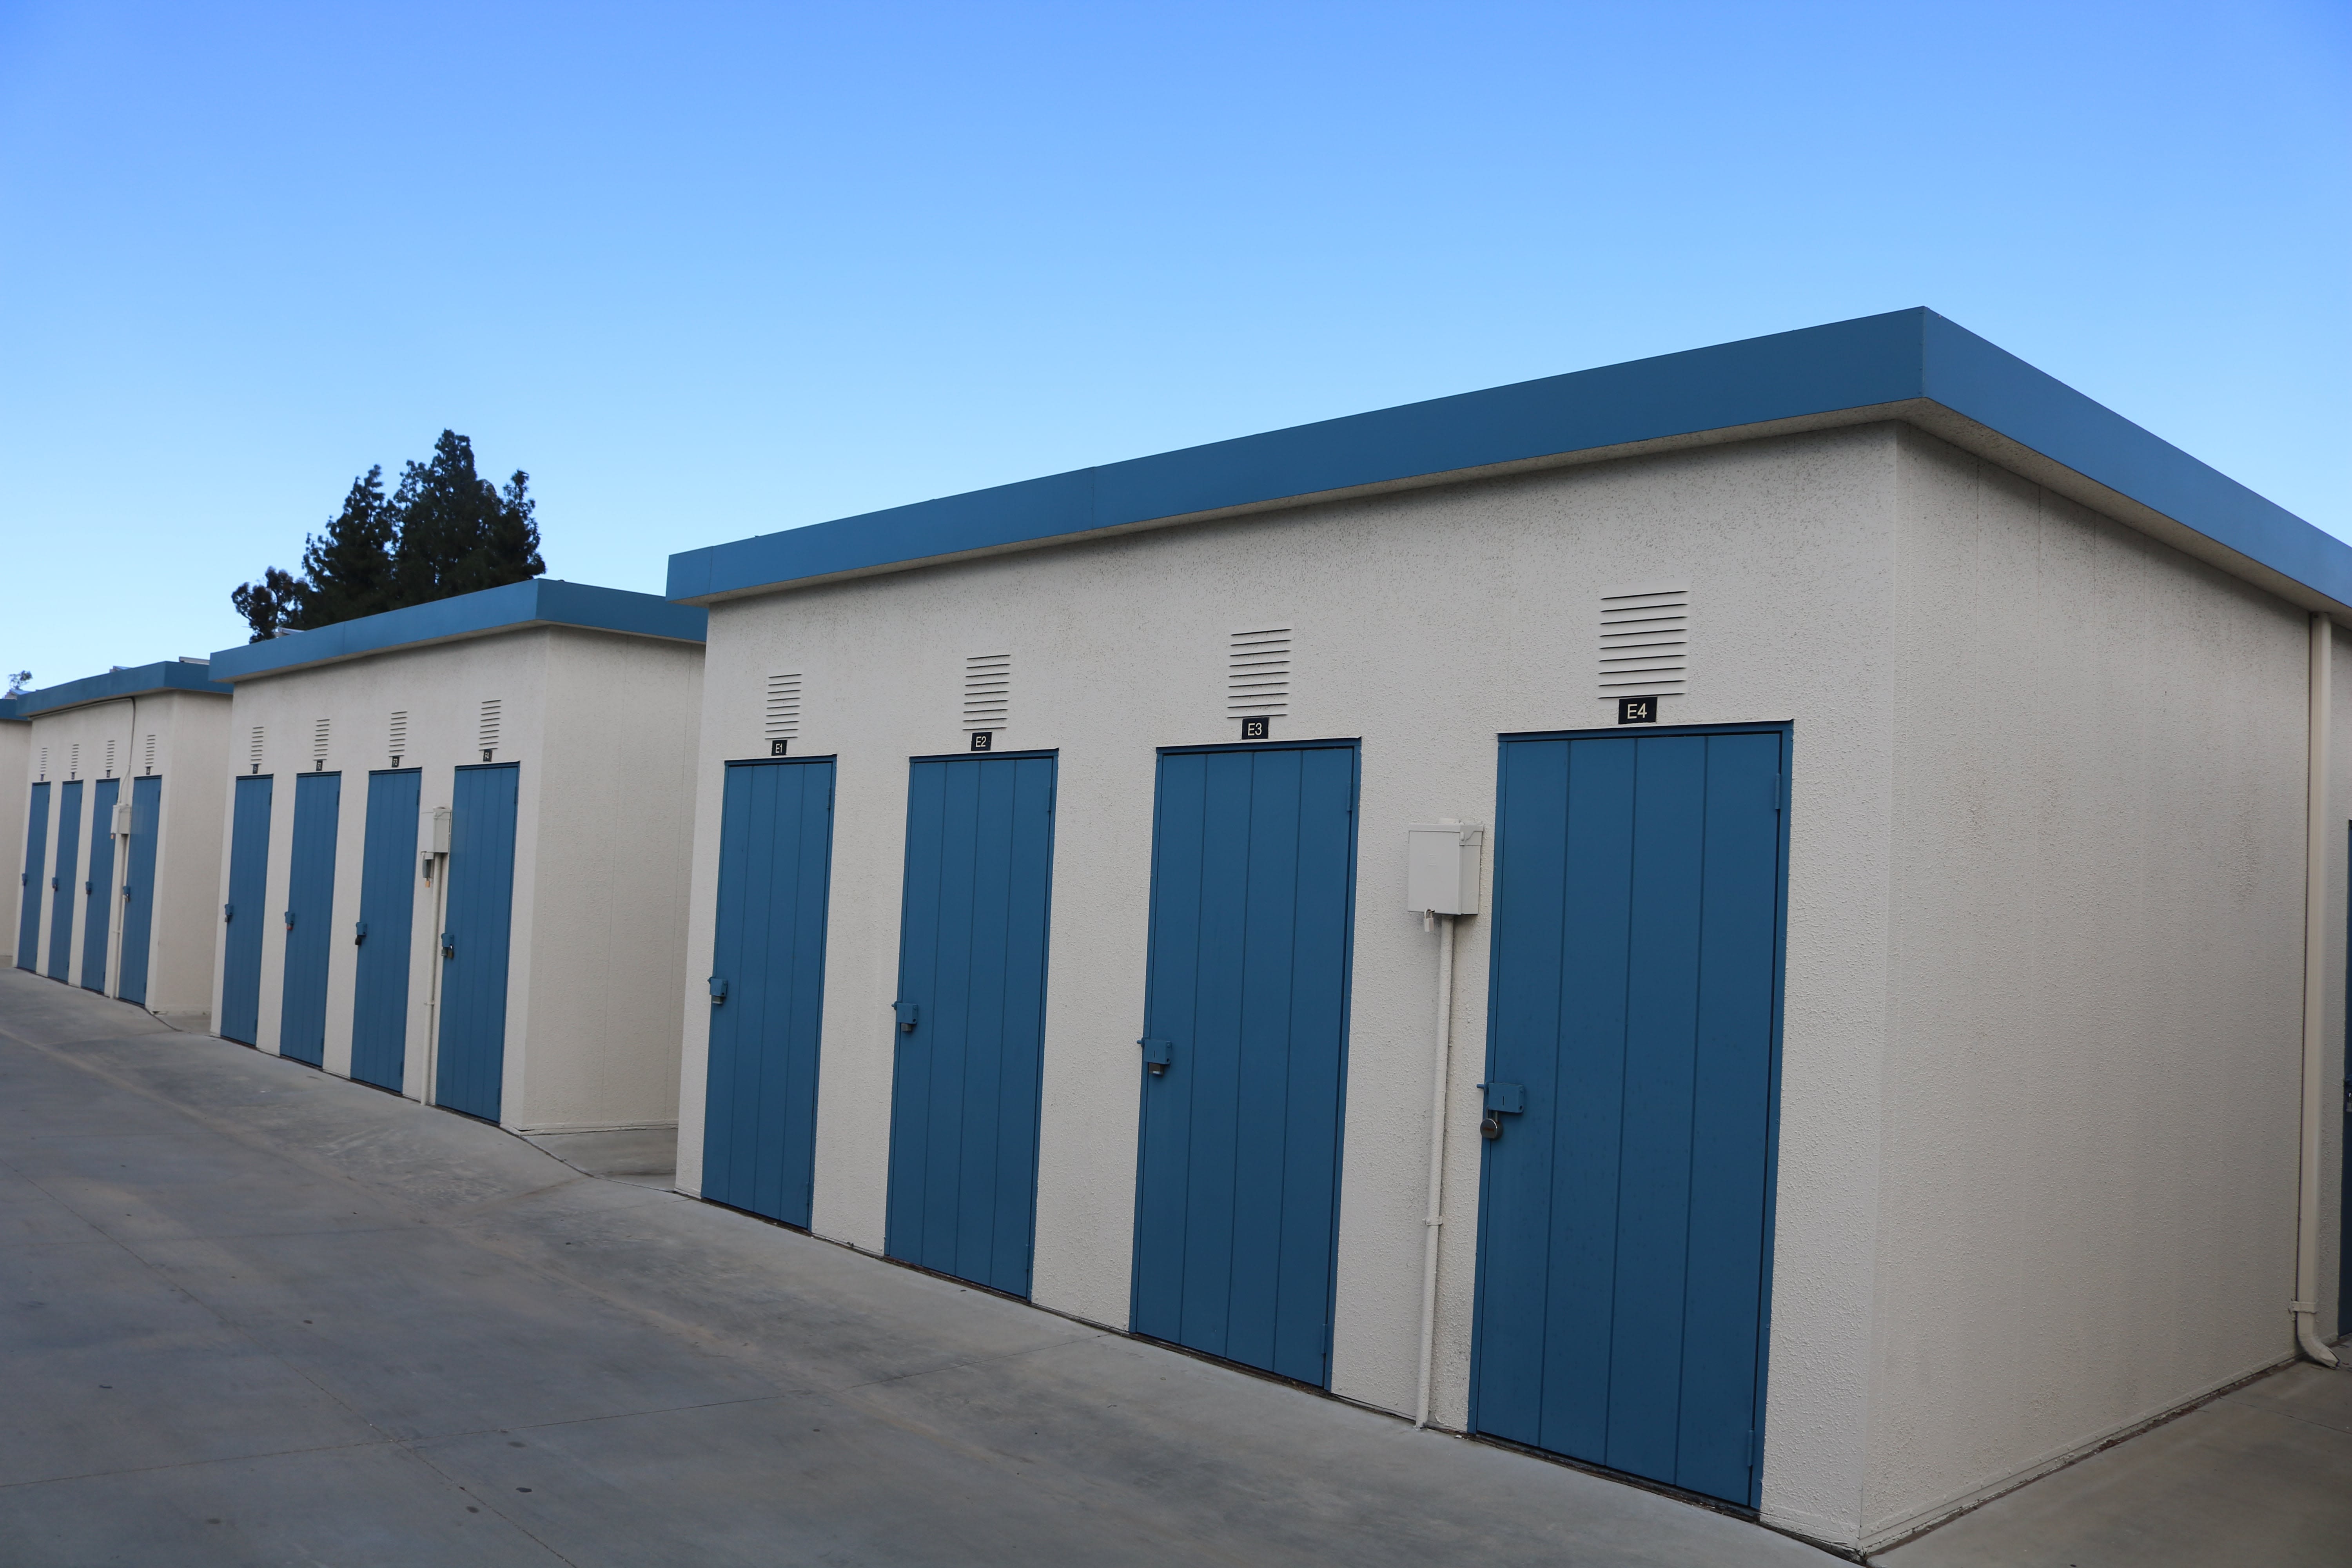 A row of outdoor units at Golden State Storage - Roscoe in North Hills, California